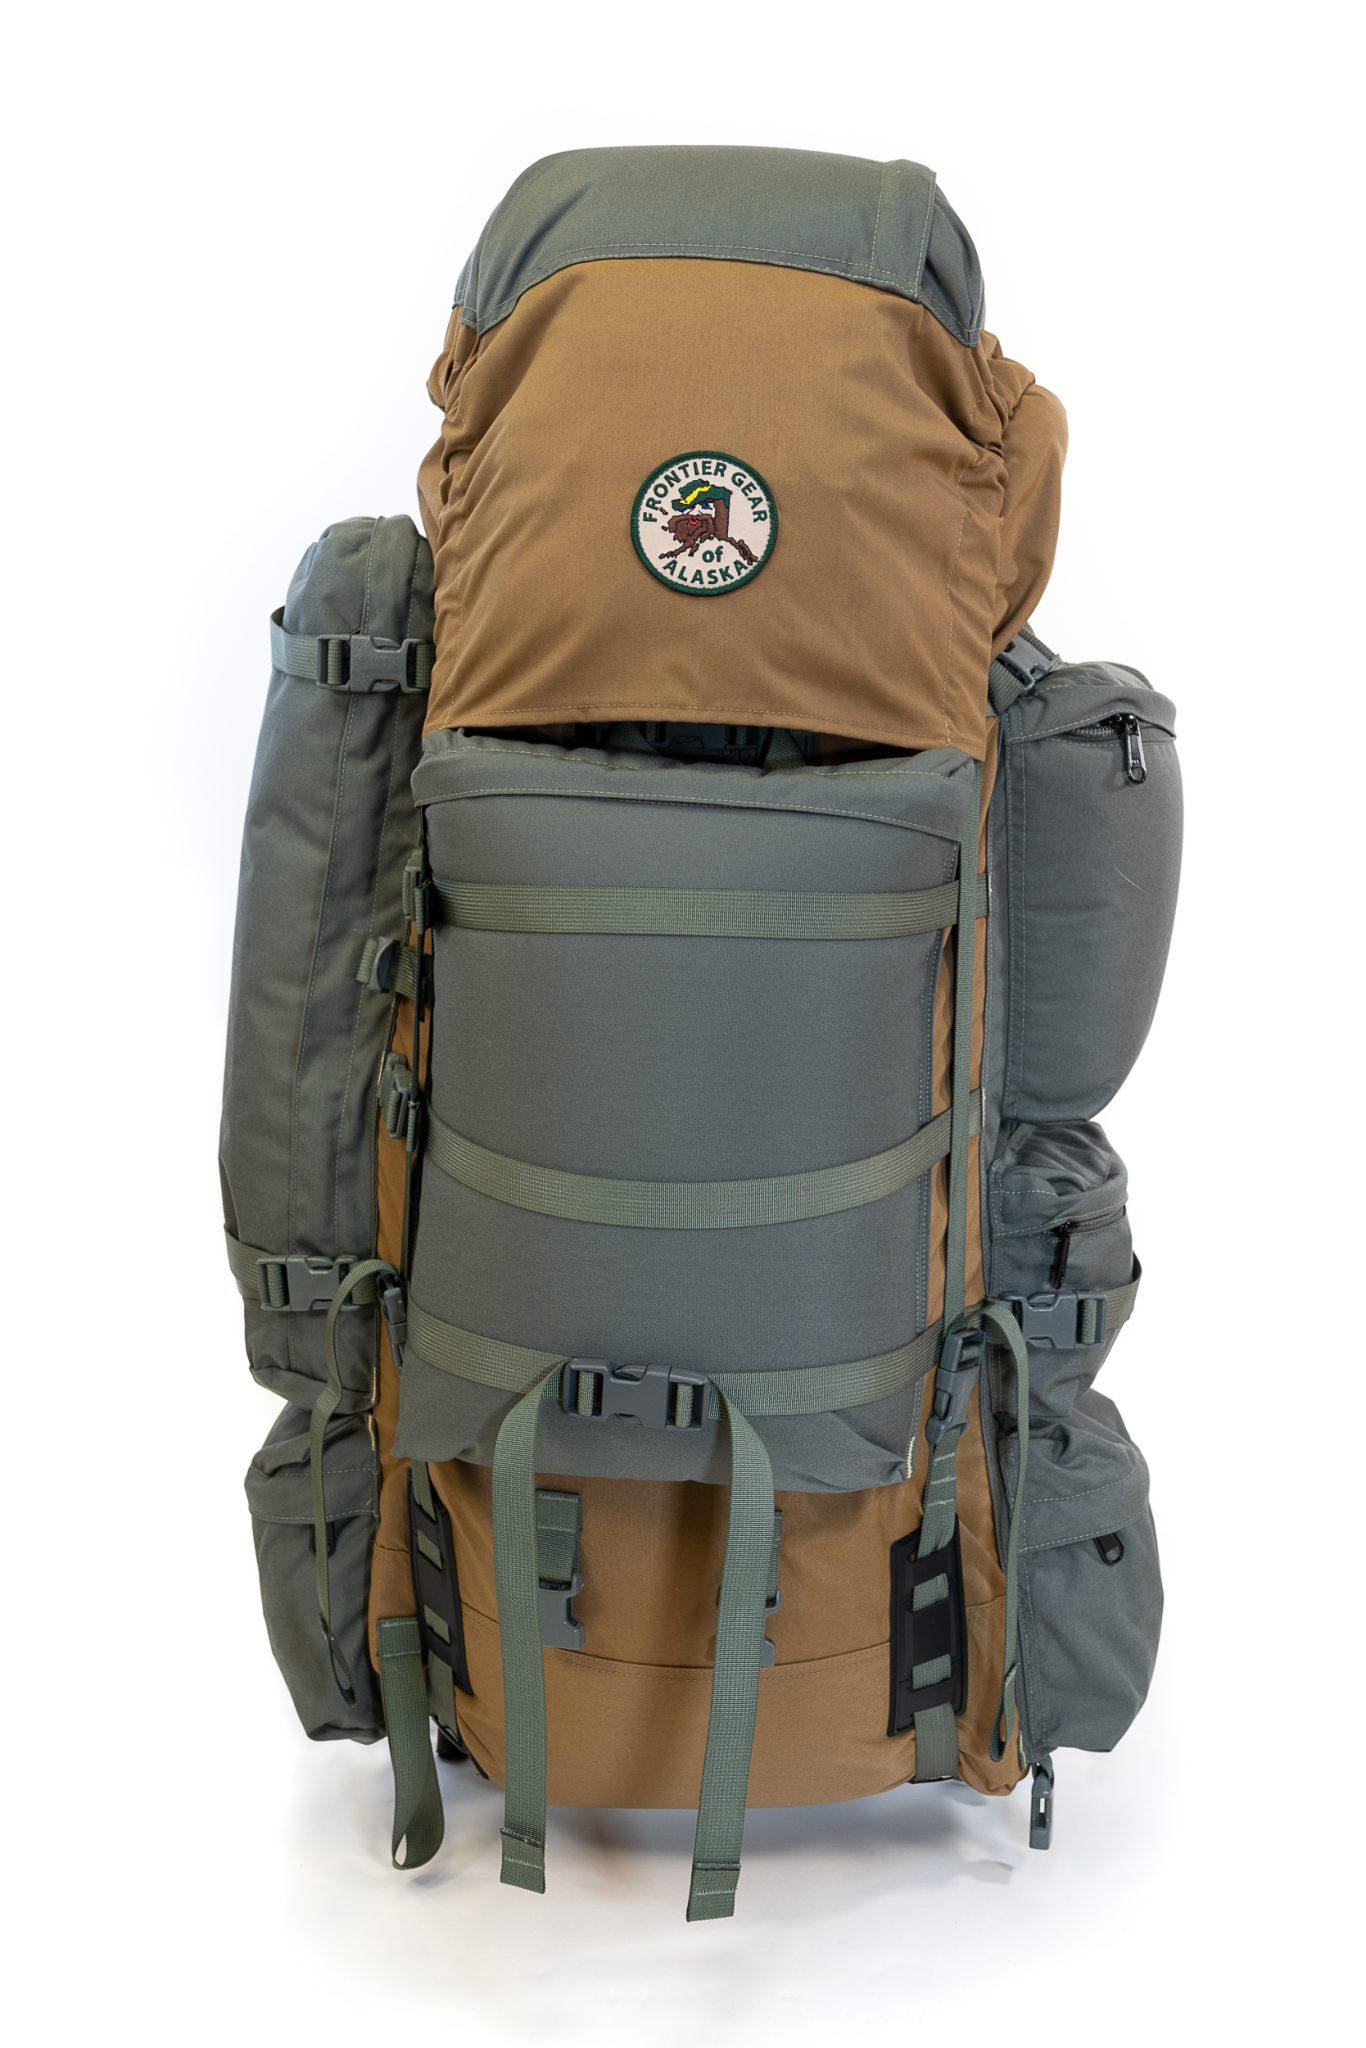 Exo Mountain Gear Backpack | lupon.gov.ph